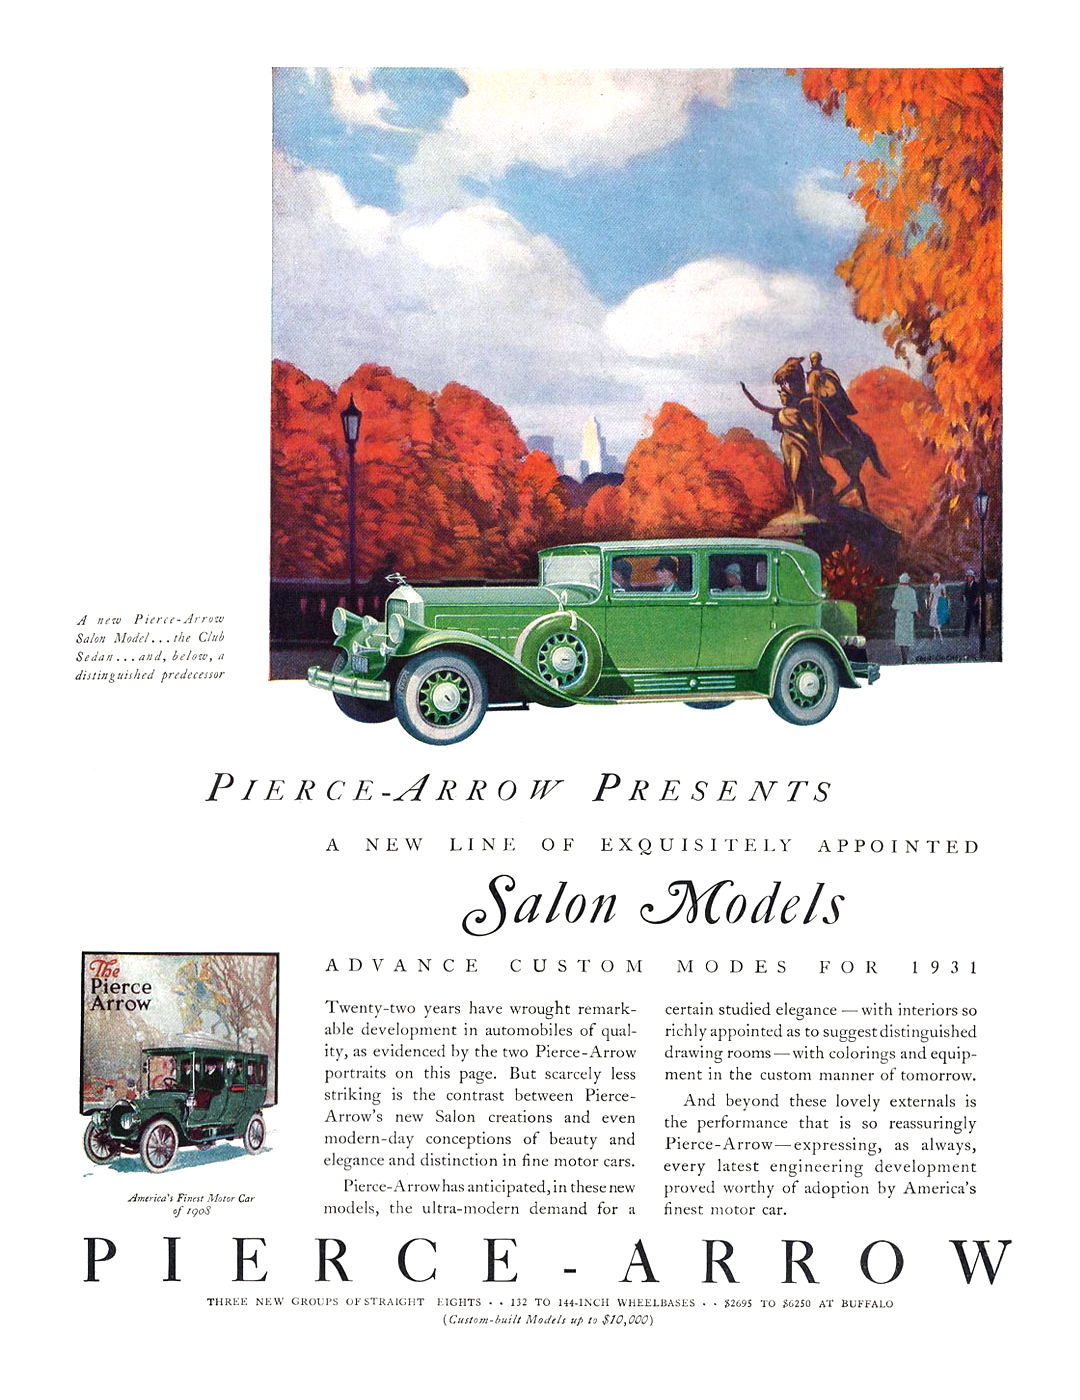 Pierce-Arrow Ad (September–October, 1930) - Illustrated by Cecil Chichester - A new Pierce-Arrow Salon Model... the Club Sedan... and, below, a distinguished predecessor